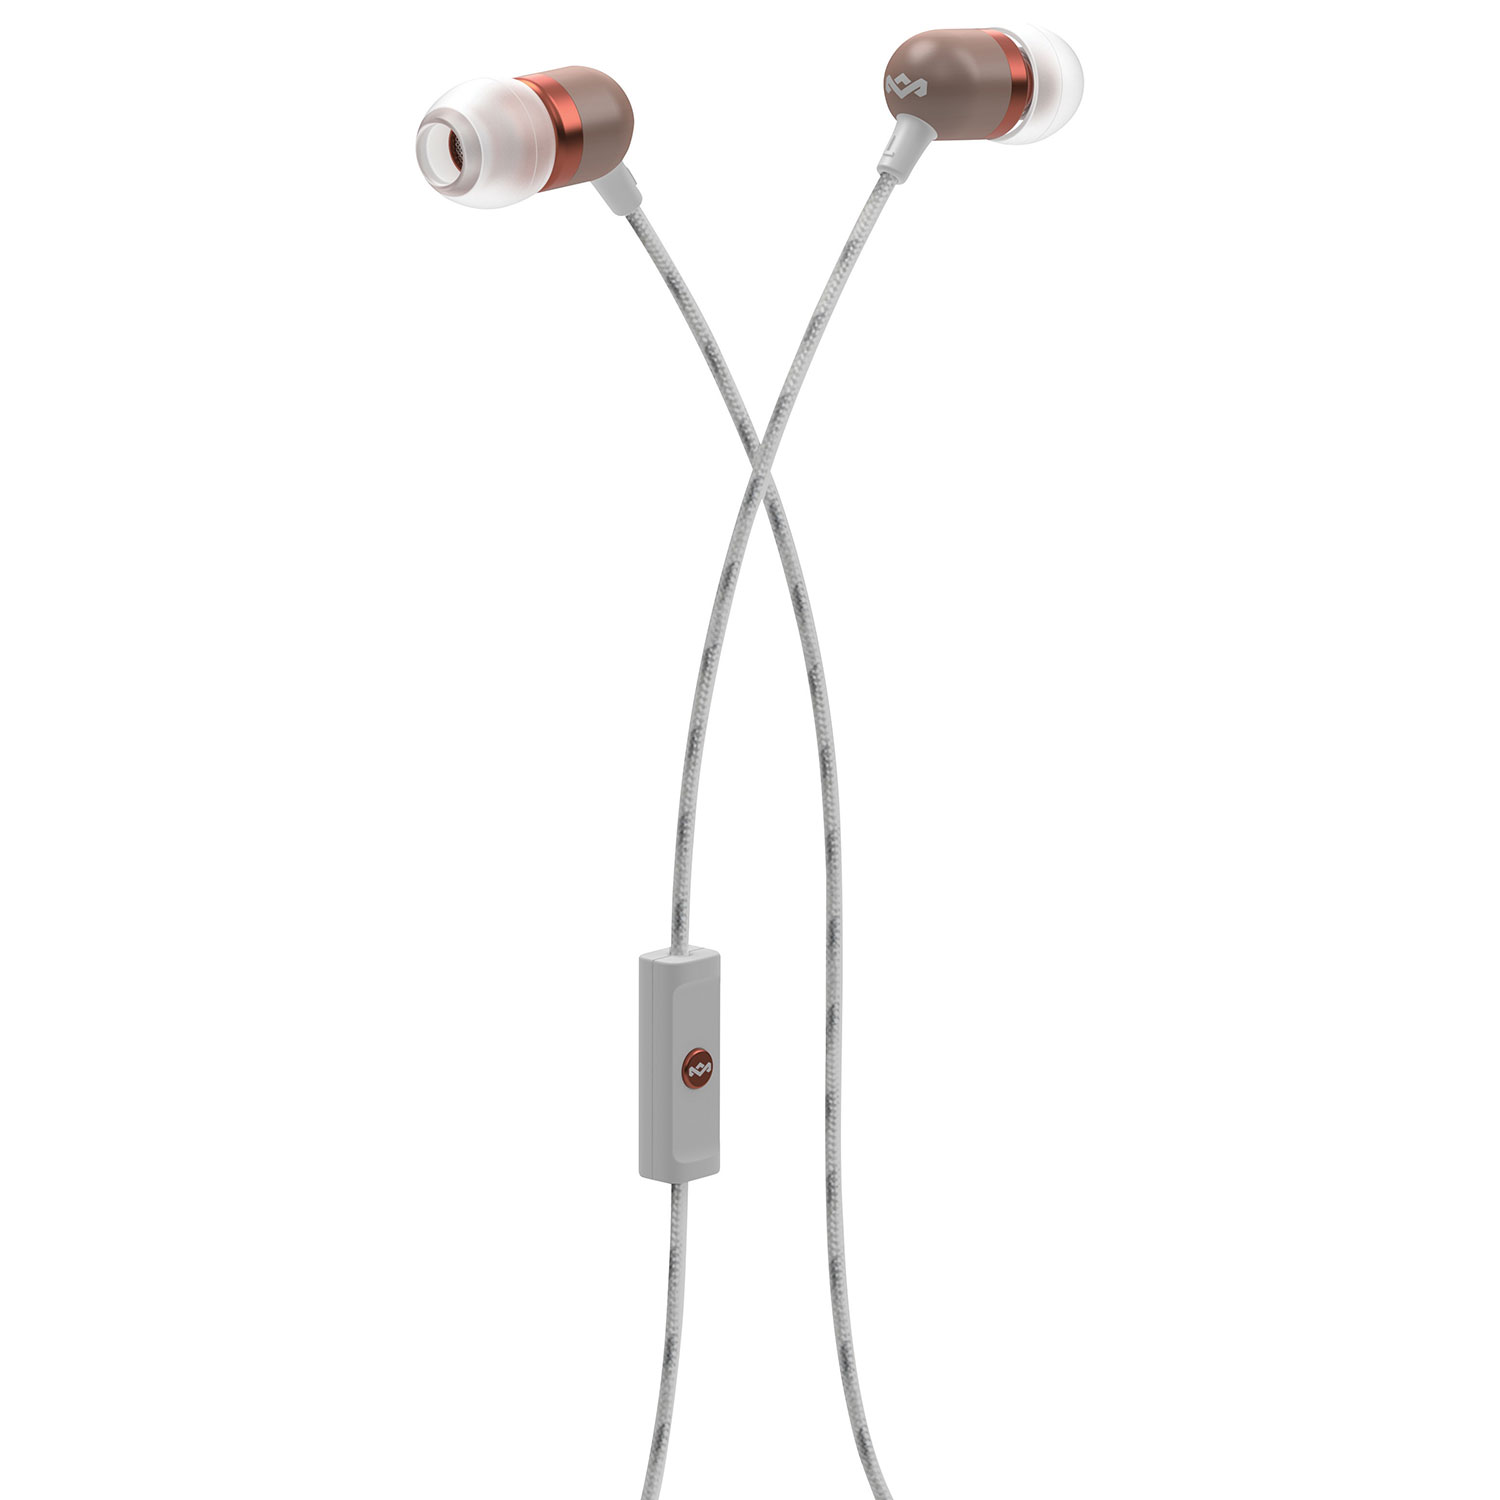 House of Marley Smile Jamaica In-Ear Sound Isolating Headphones with Mic (EM-JE041-CP) - Tan/Copper